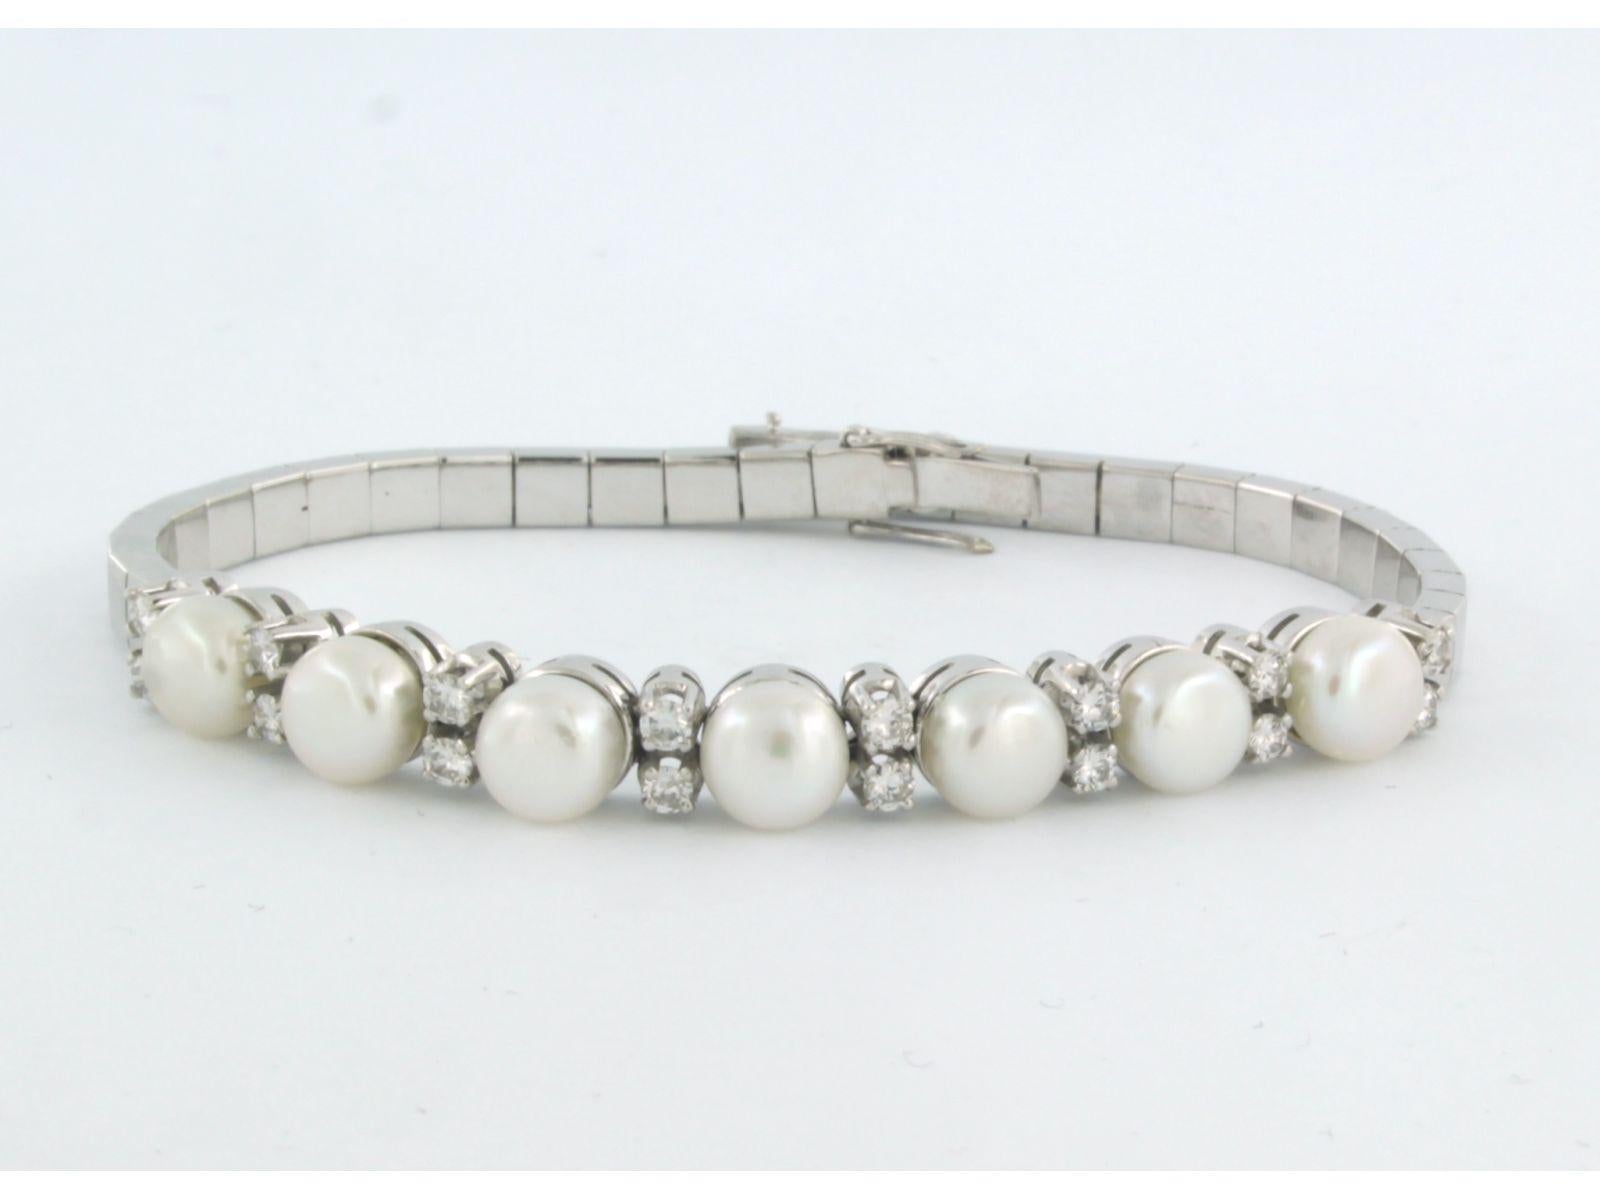 18k white gold bracelet set with pearl and brilliant cut diamonds. 0.50ct - F/G - VS/SI - 18 cm long

detailed description

 the length of the bracelet is 18 cm long, 6.3 mm wide and 6.5 mm high

weight 18.8 grams

set with

- 7 x 6.3 mm freshwater